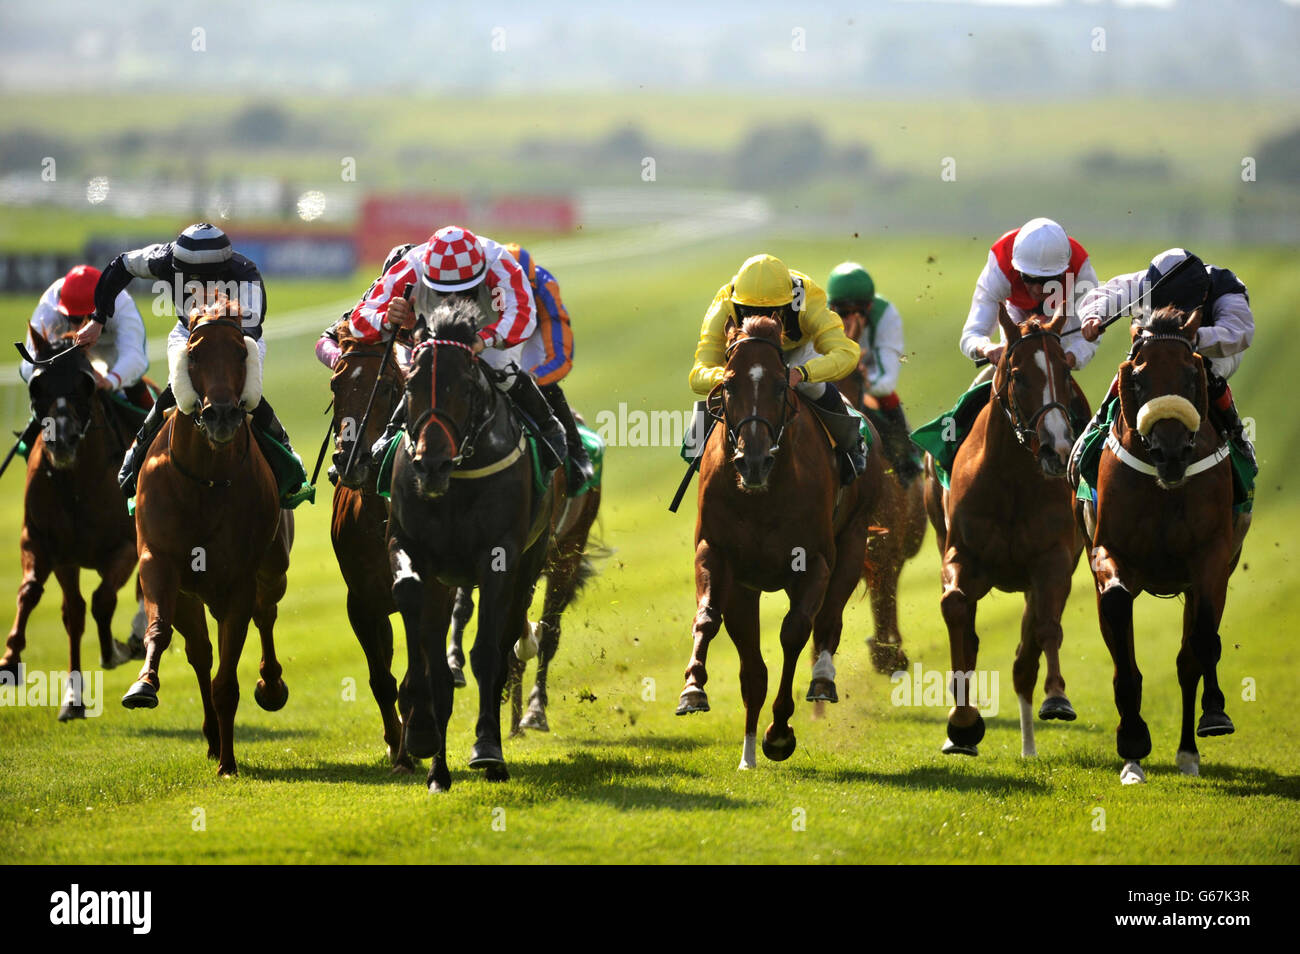 Slade Power ridden by Wayne Lordan (third left) ridden by The Woodies D.I.Y. Sapphire Stakes during Dubai Duty Free Irish Derby Day at Curragh Racecourse in Co. Kildare, Ireland. Stock Photo